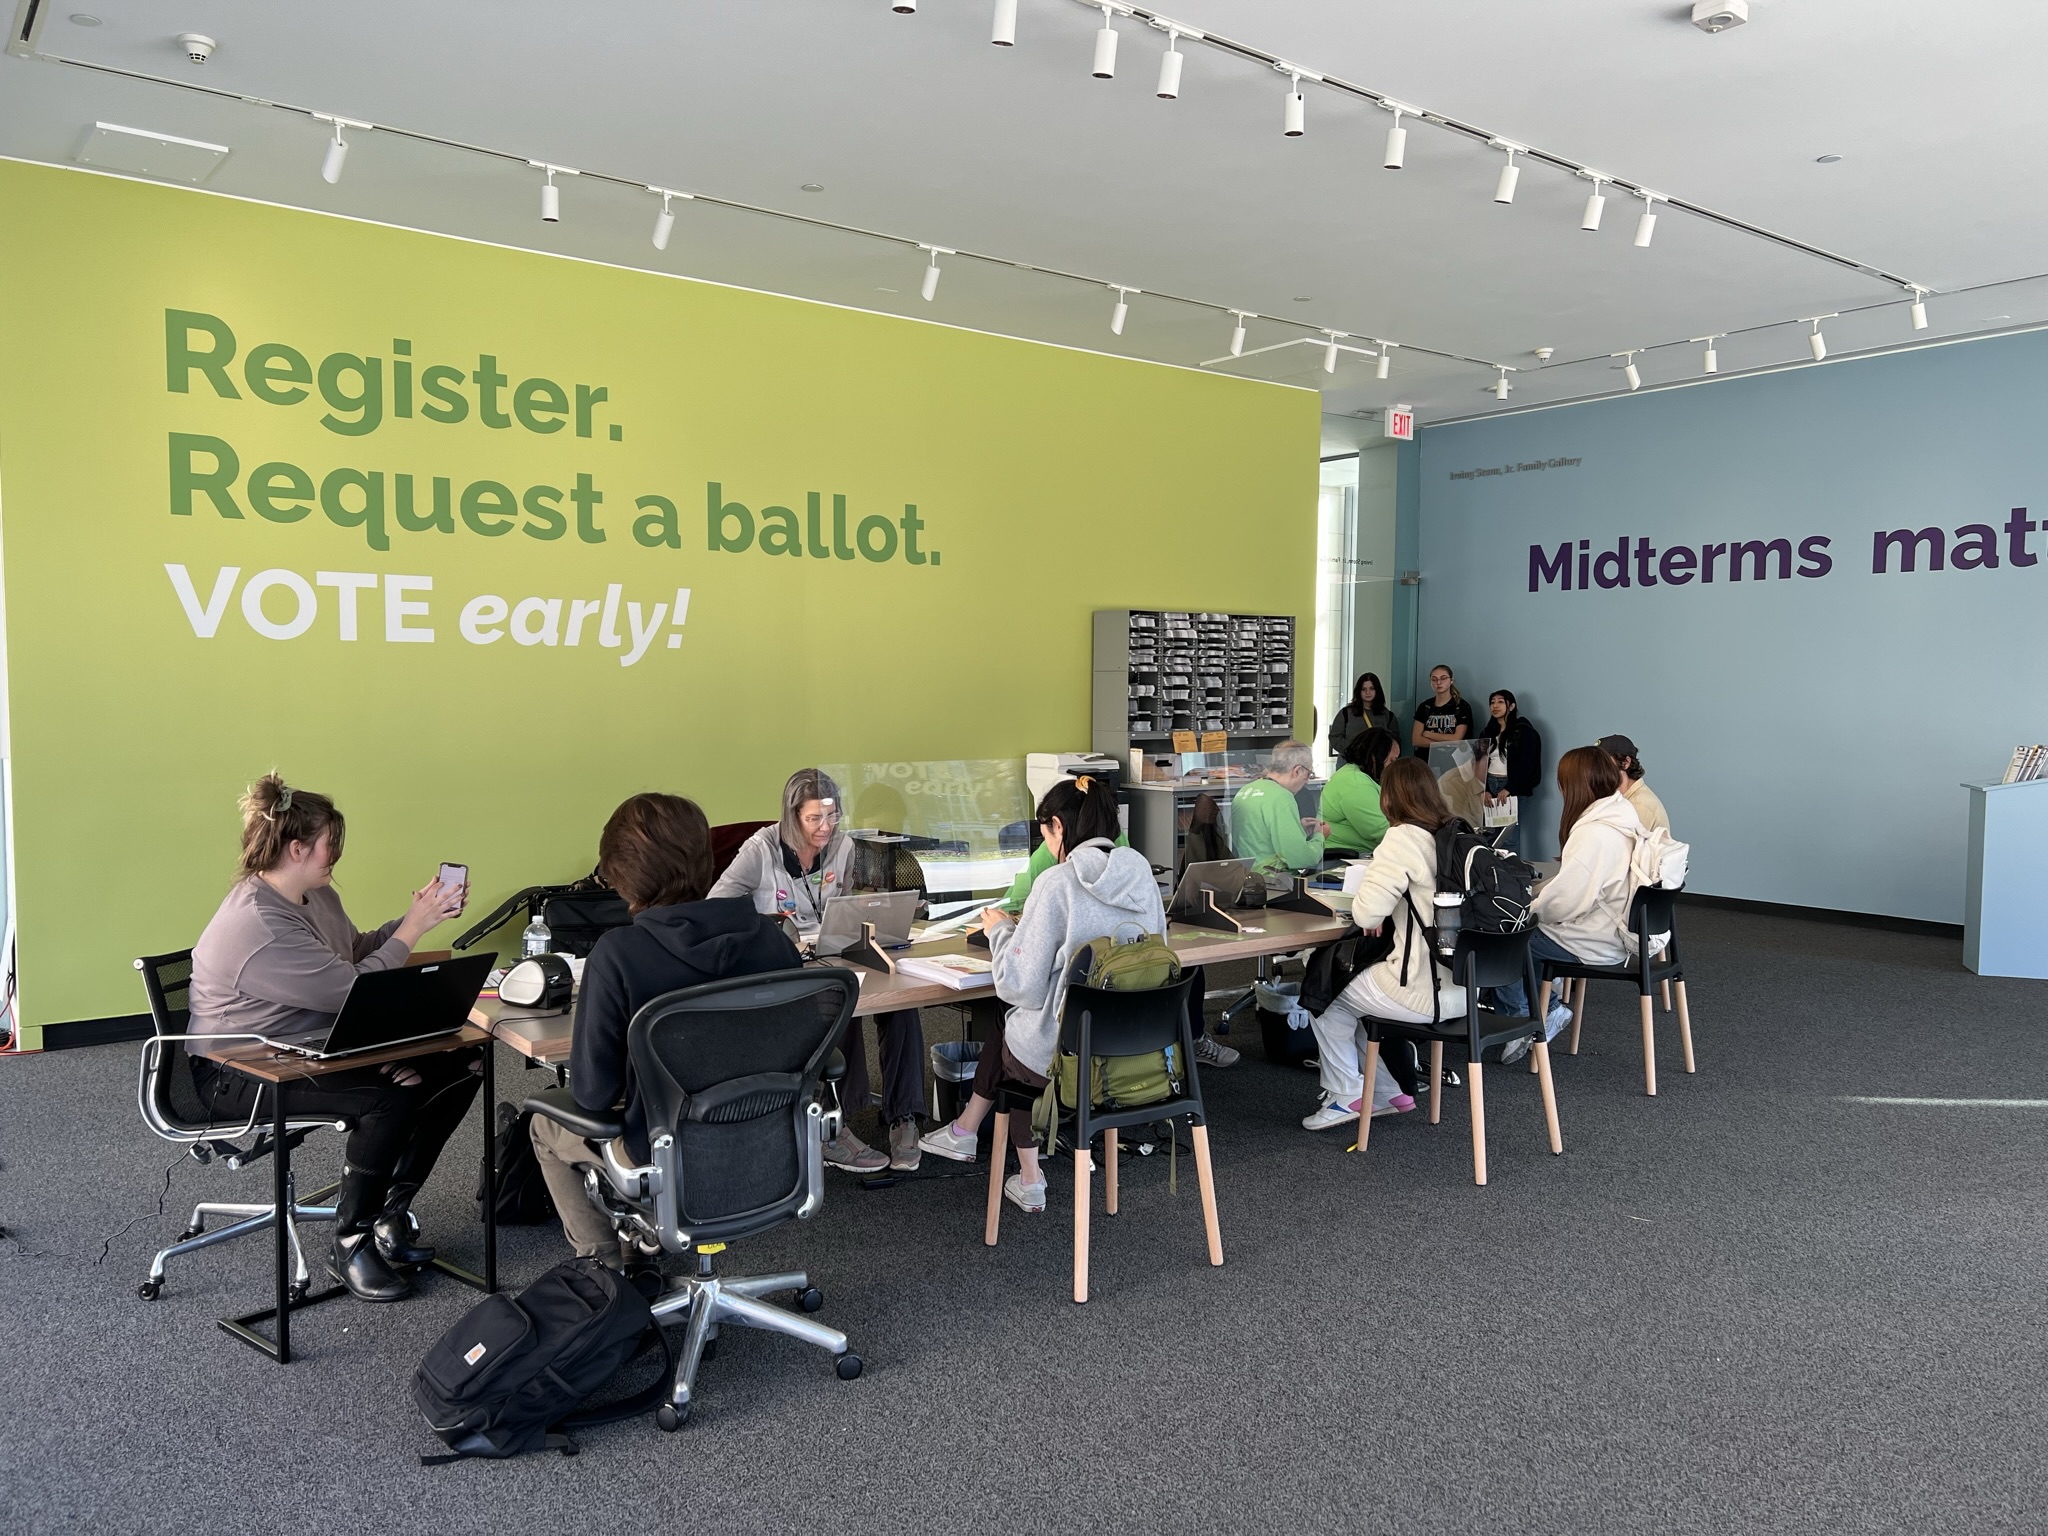 Image of voters registering to vote and picking up their ballots at the University of Michigan Museum of Art